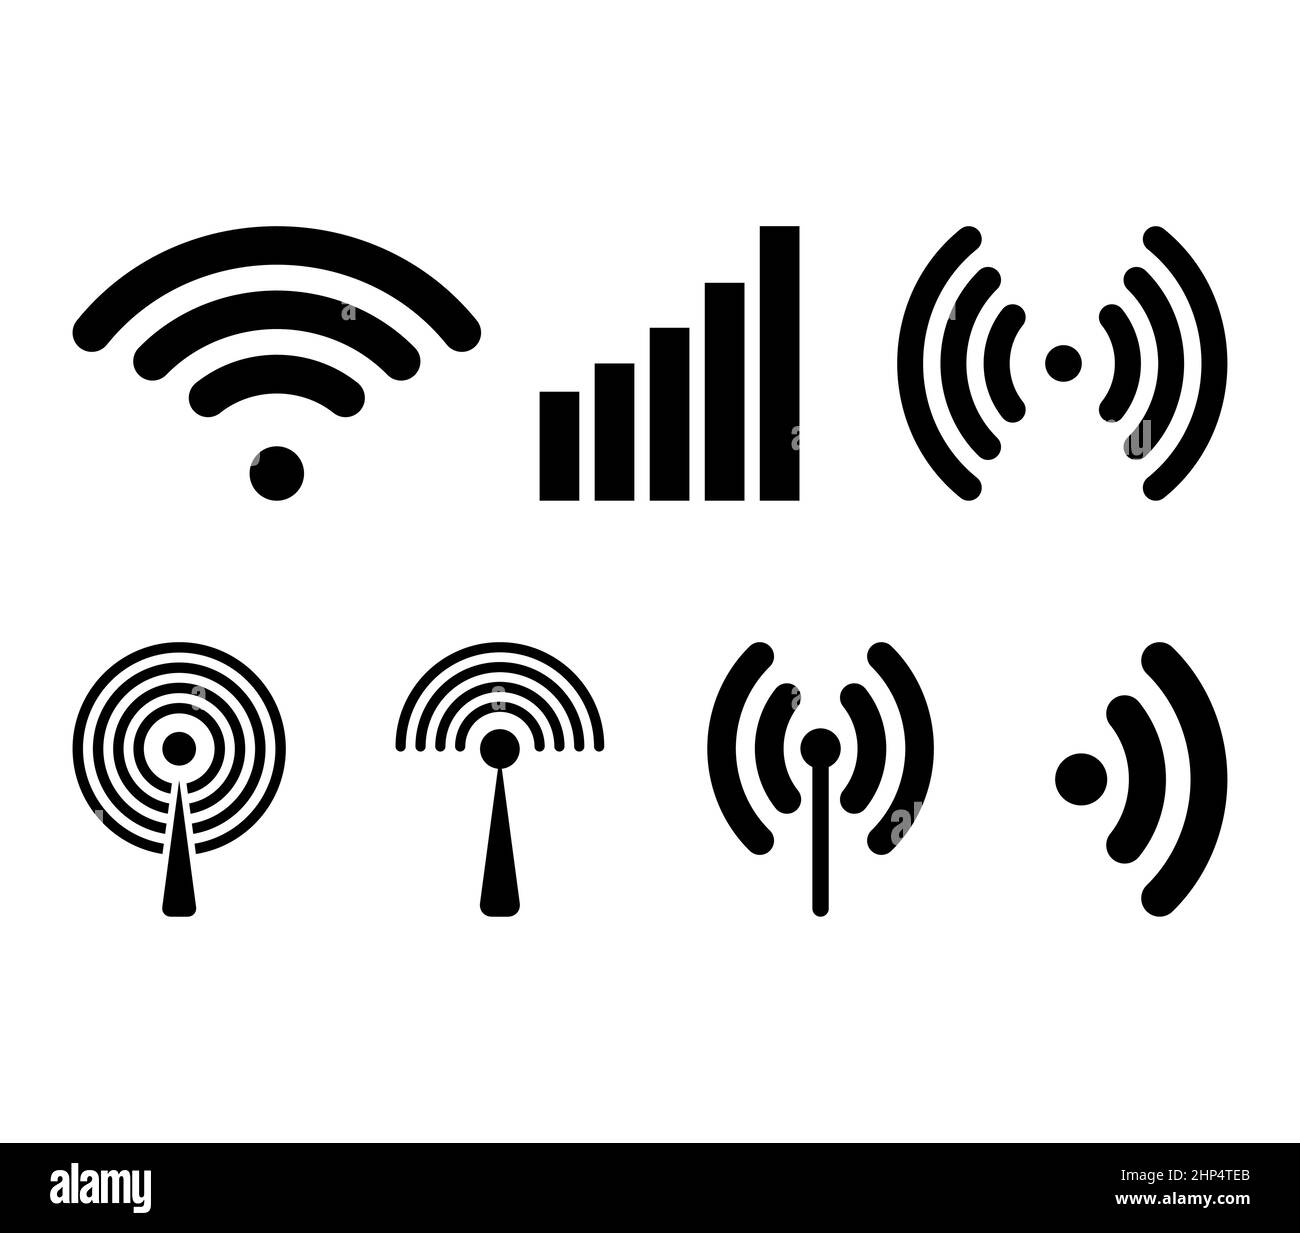 Radio waves icon. Network broadcasting symbol collection. Vector illustration set isolated on white. Stock Vector